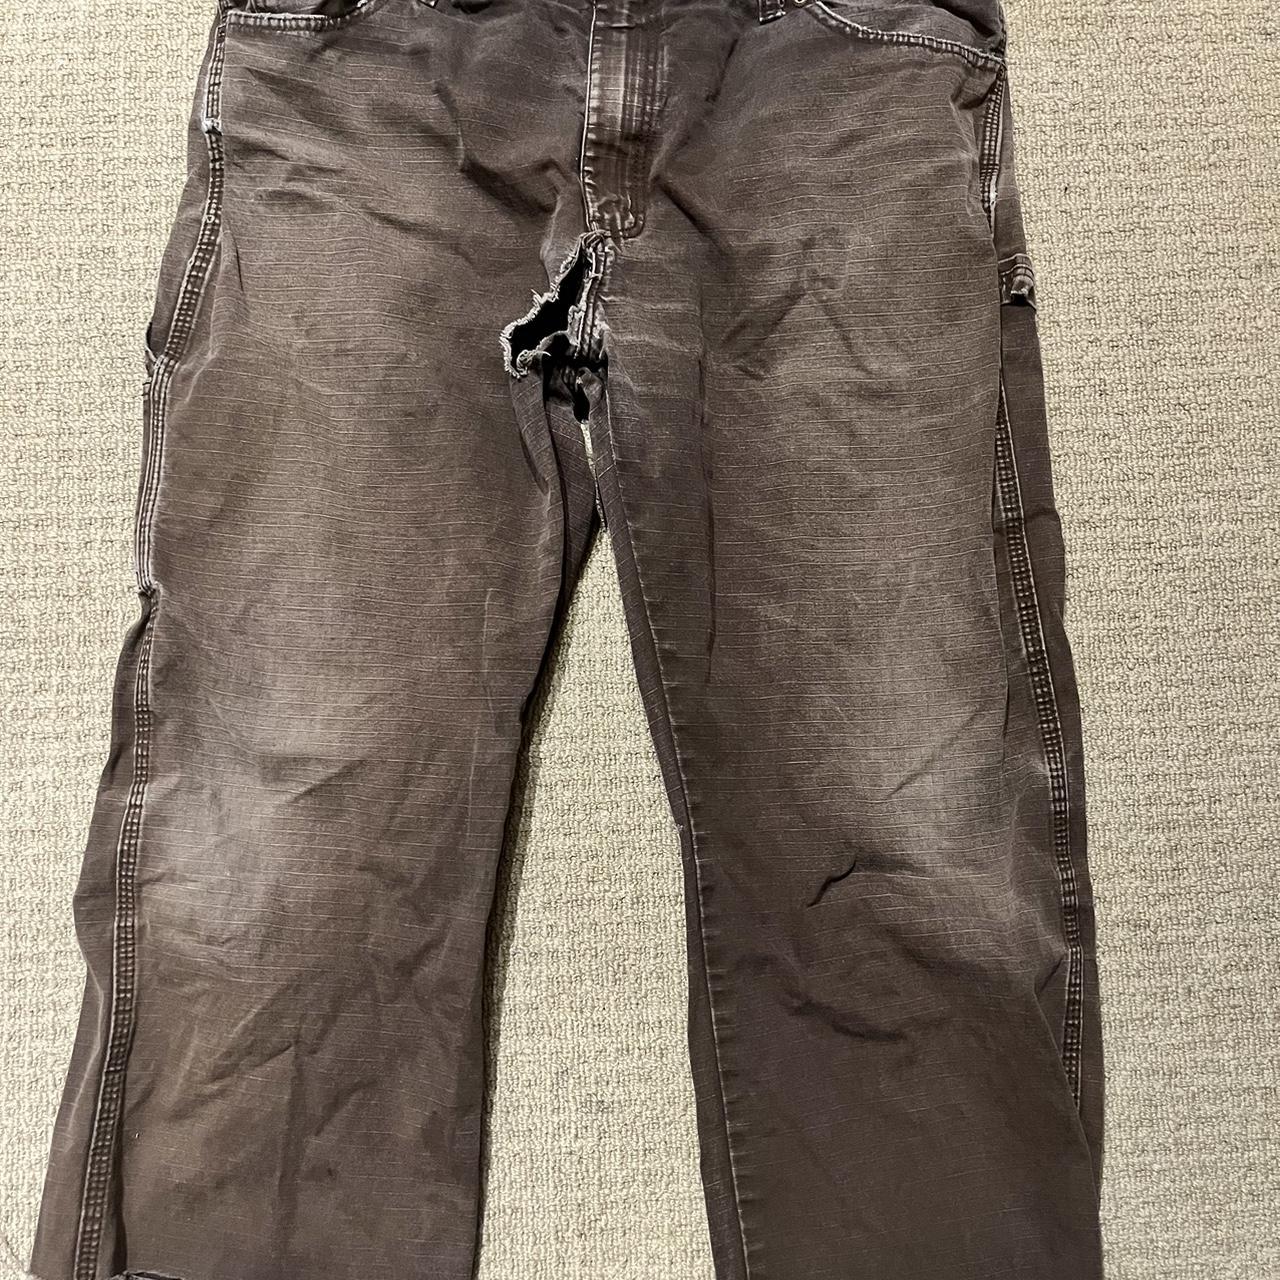 used condition size 34 cut jeans hole in bottom - Depop